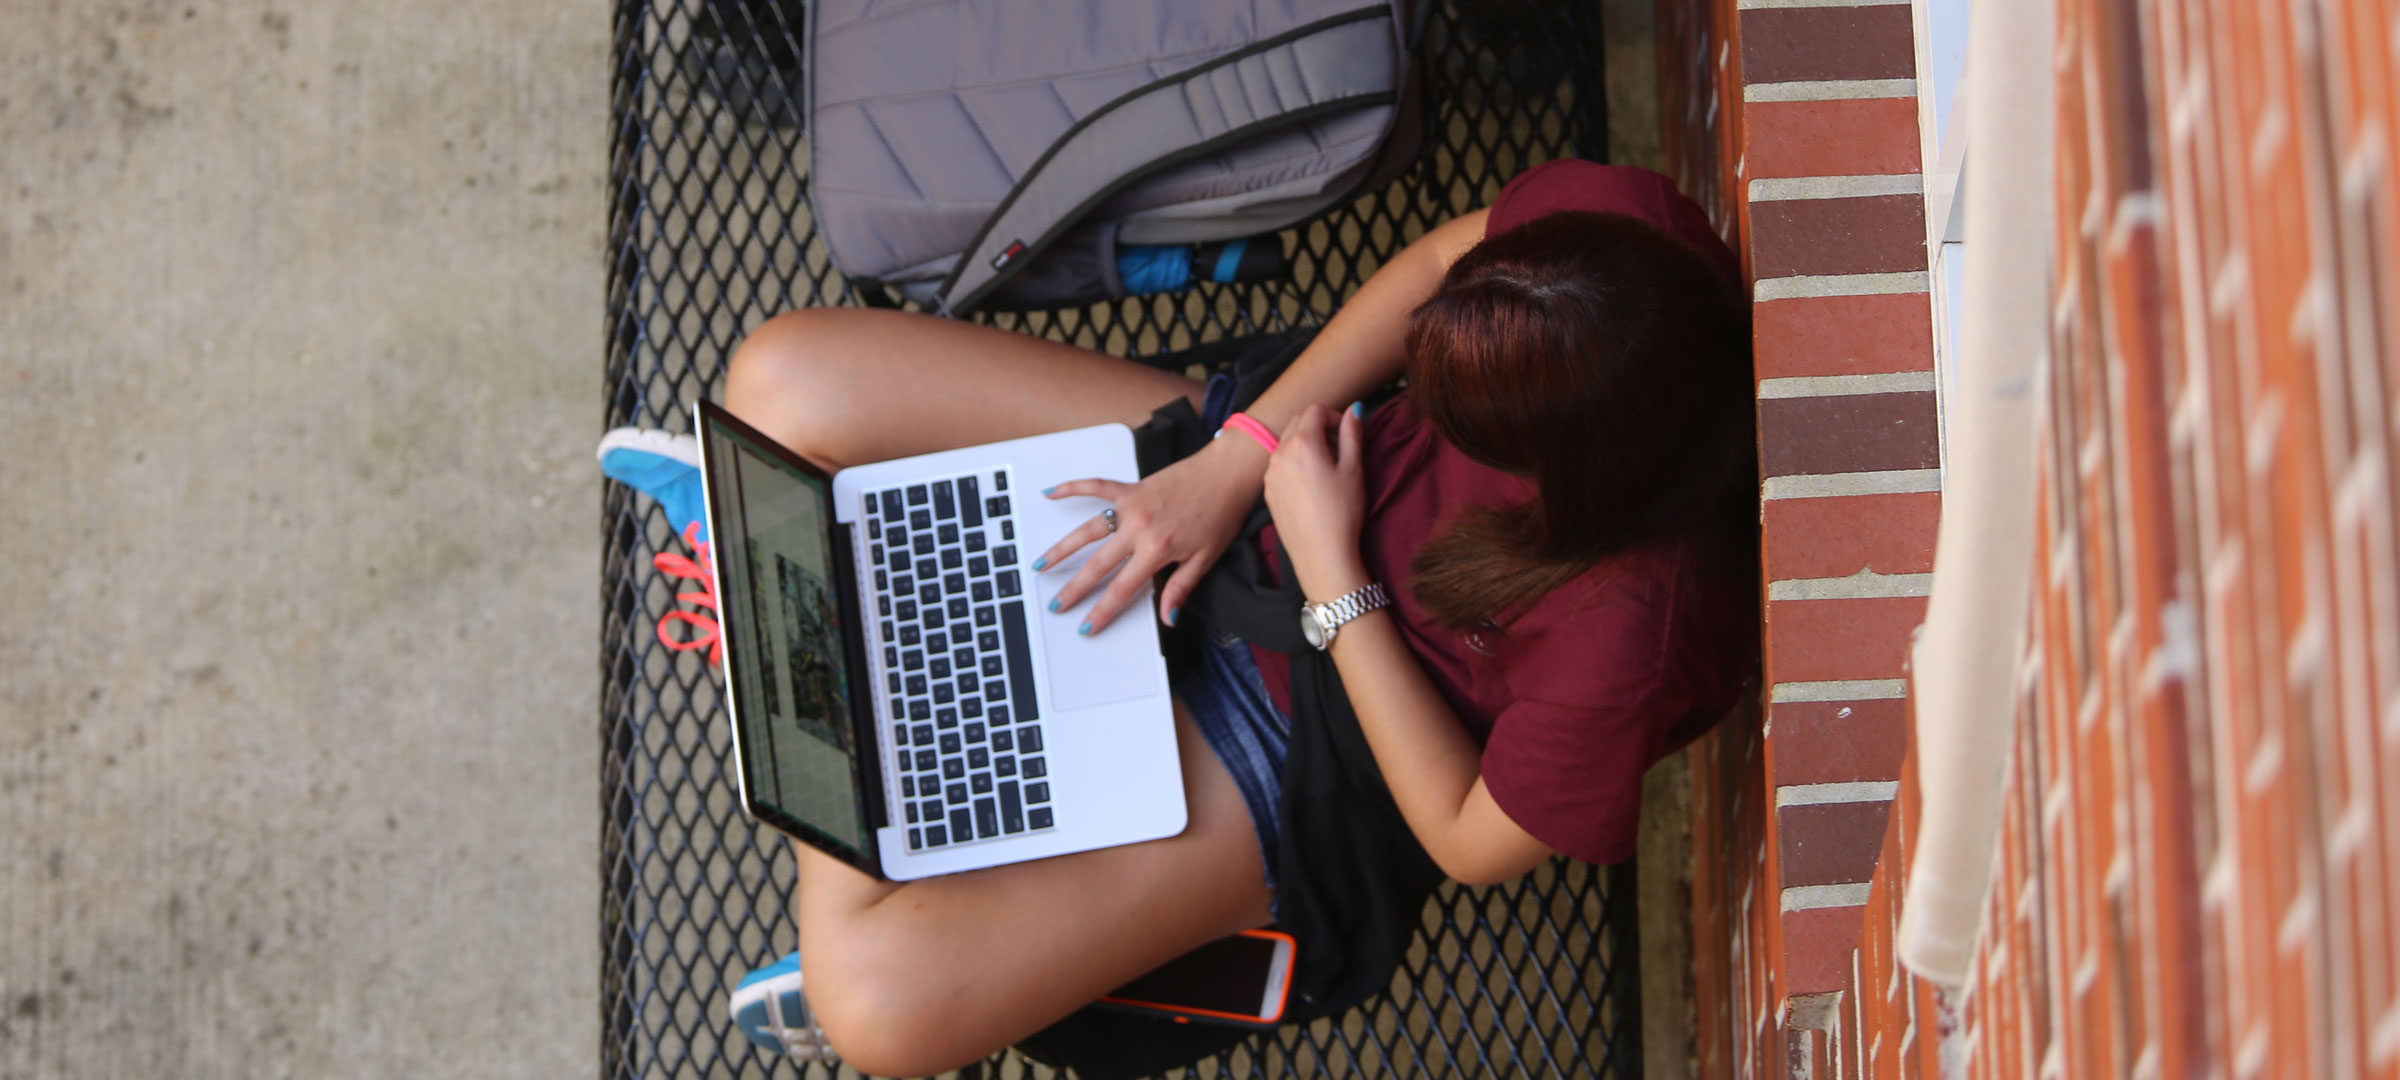 Bryman College student sits on campus and looks at her laptop while leaning against a brick wall